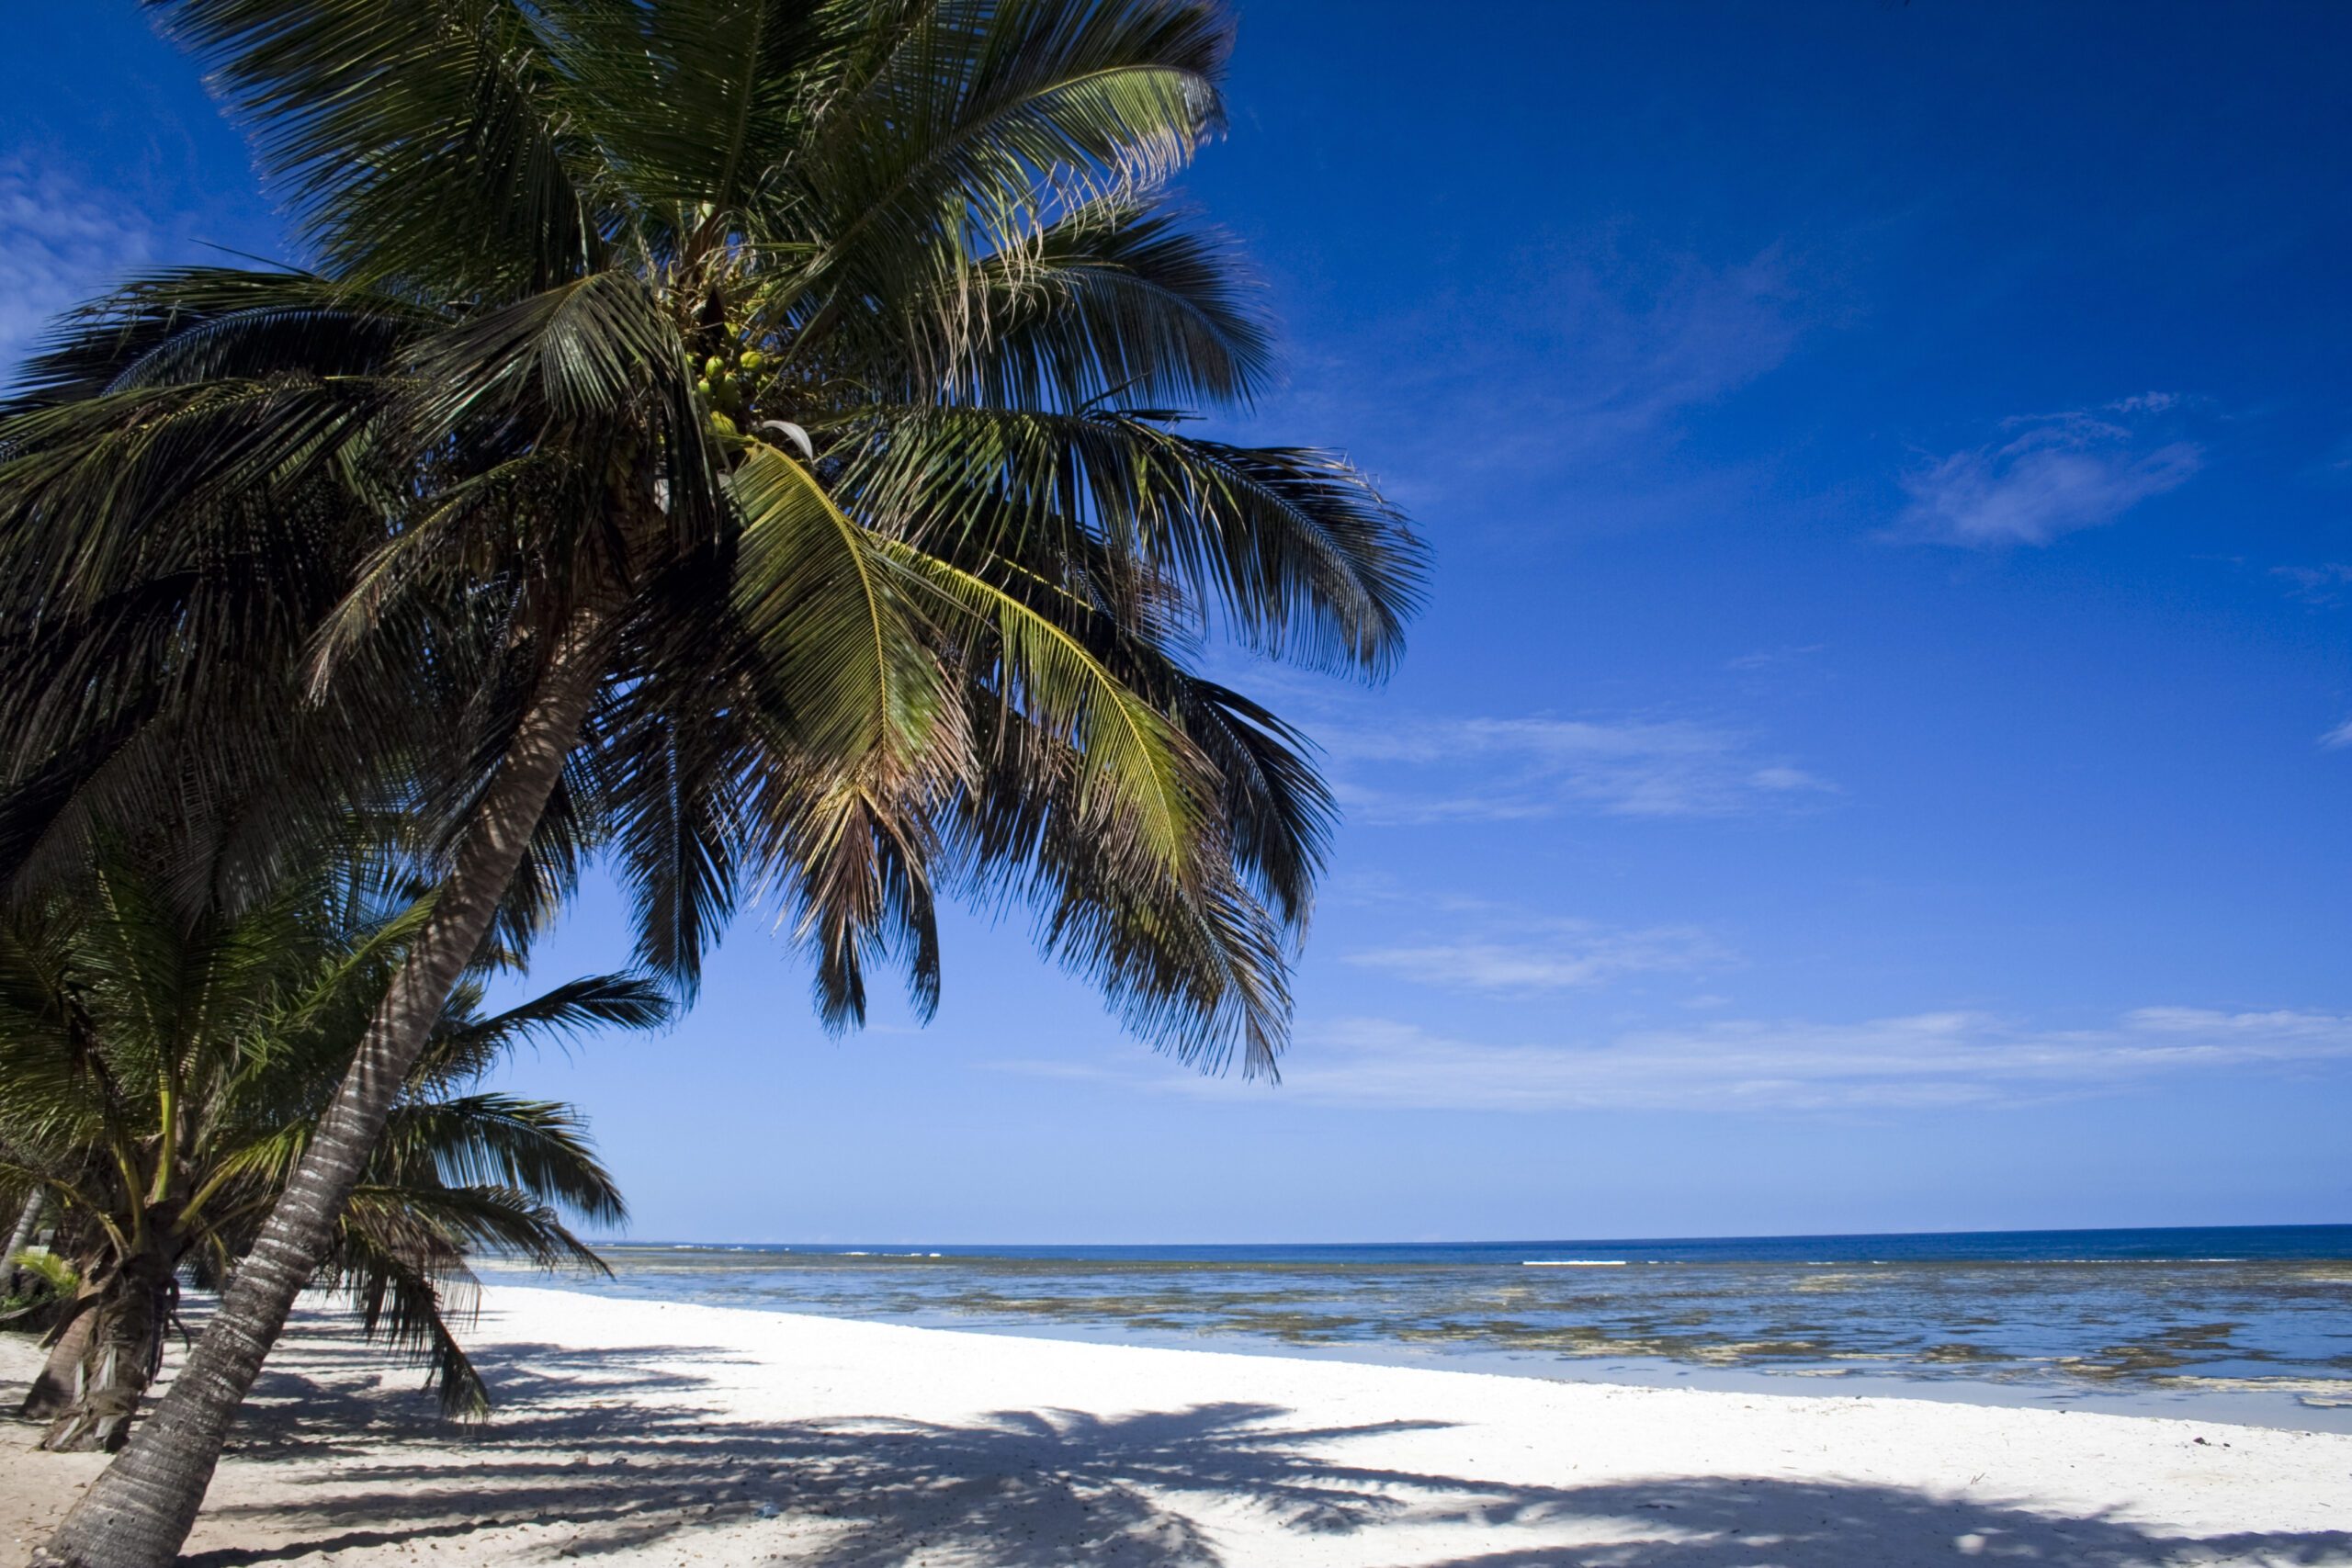 White sandy beach lined with palm trees